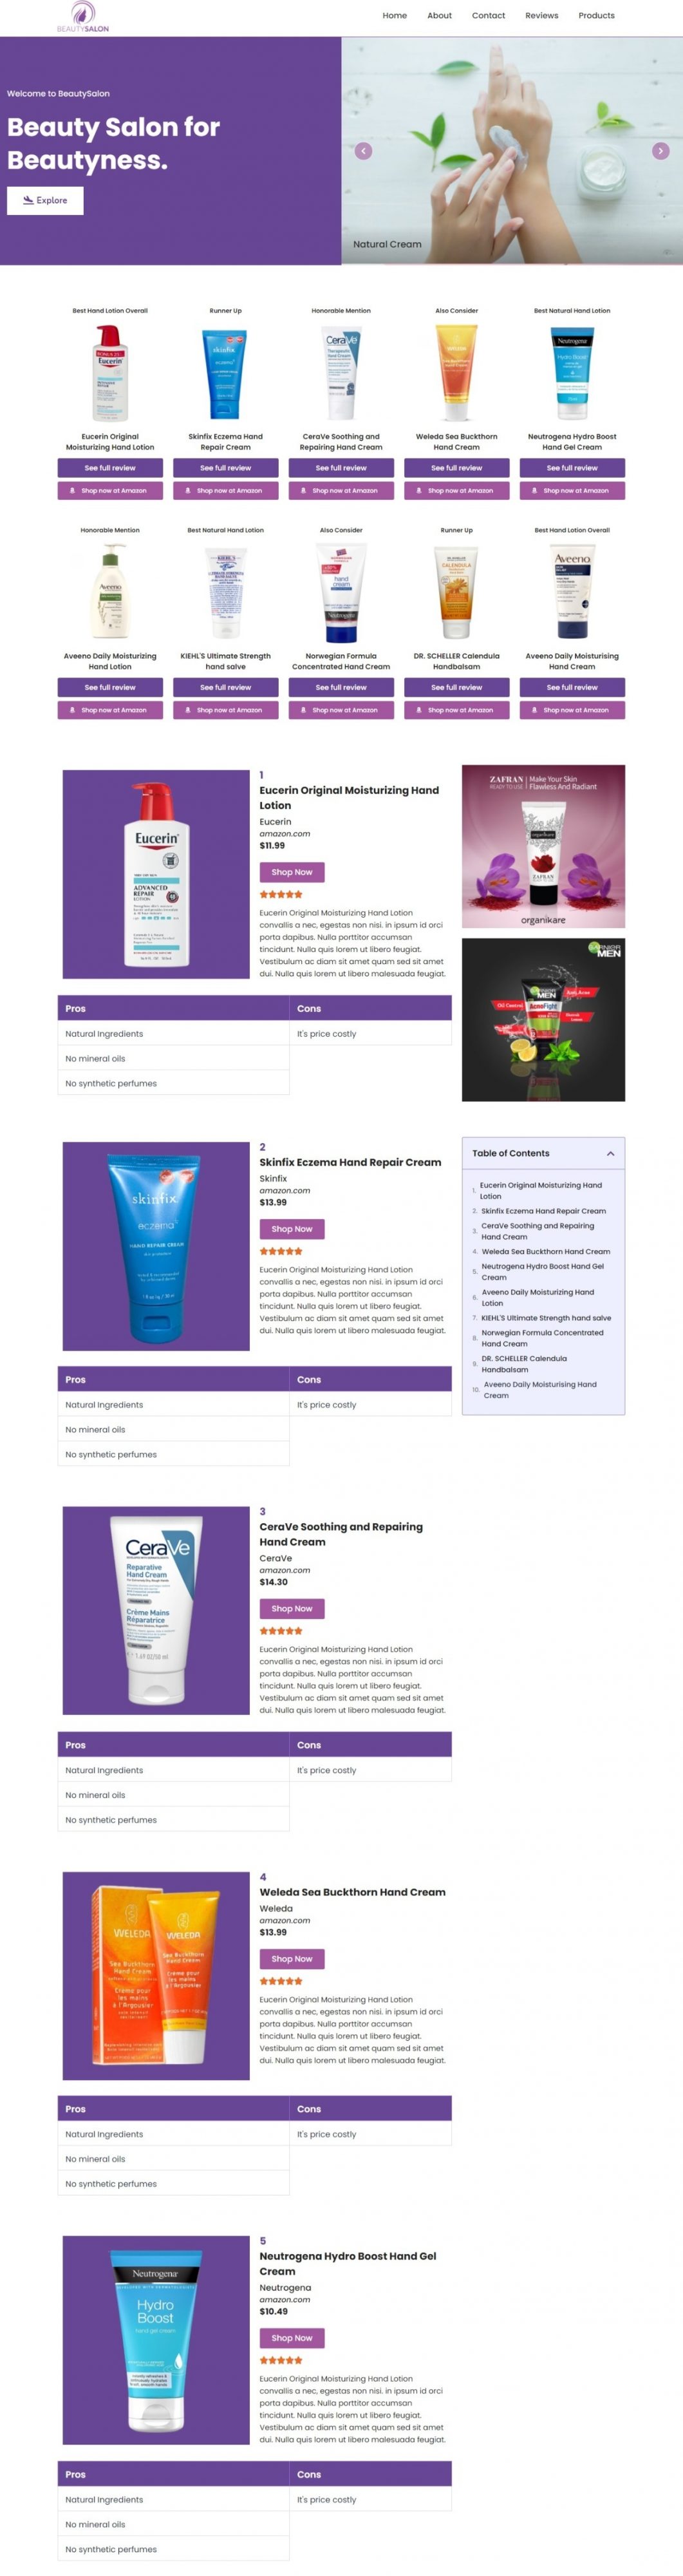 beauty-salon-amazon-product-review-page-template